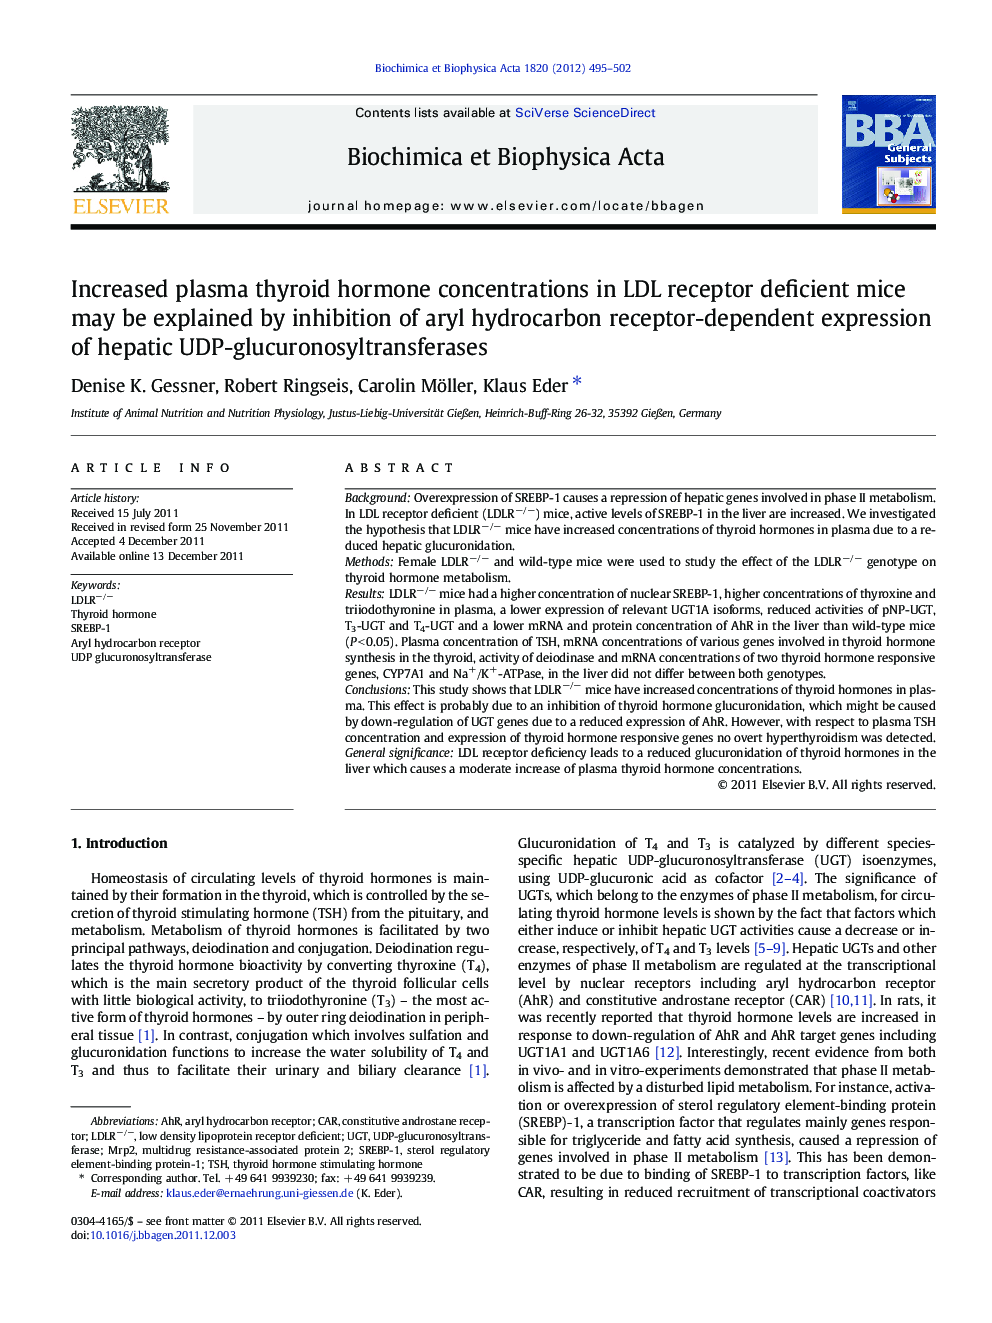 Increased plasma thyroid hormone concentrations in LDL receptor deficient mice may be explained by inhibition of aryl hydrocarbon receptor-dependent expression of hepatic UDP-glucuronosyltransferases